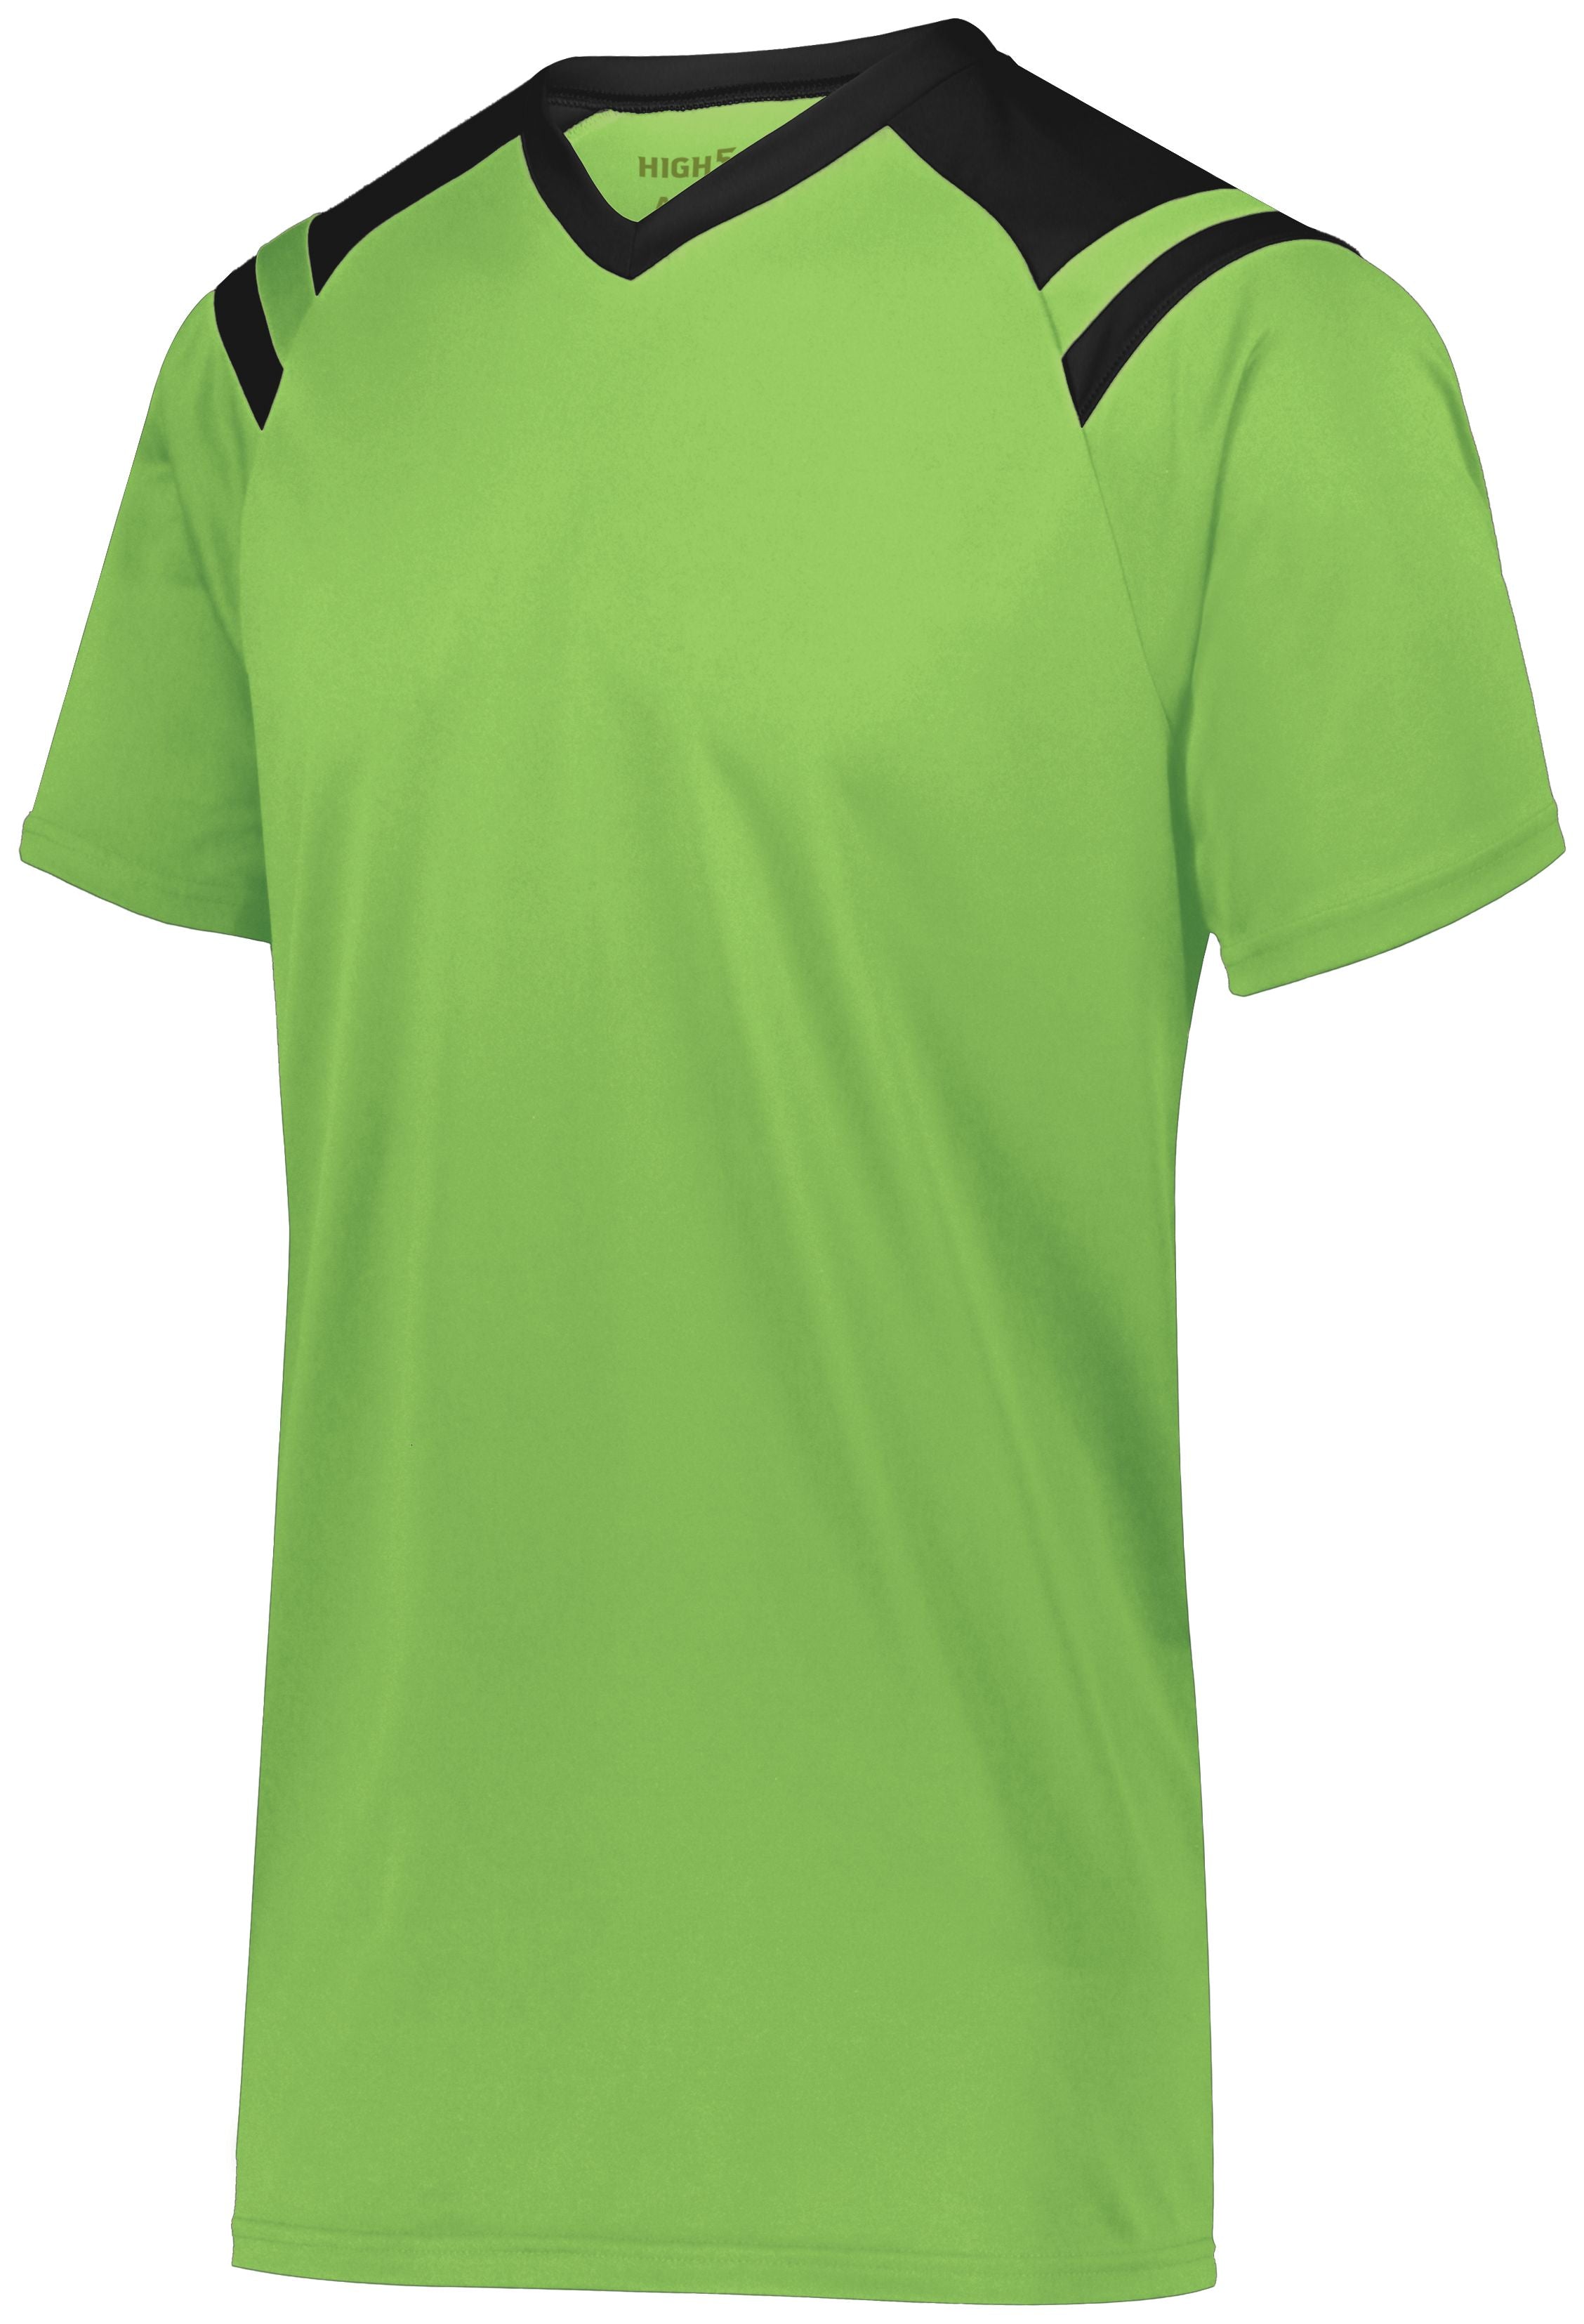 High 5 Sheffield Jersey in Lime/Black  -Part of the Adult, Adult-Jersey, High5-Products, Soccer, Shirts, All-Sports-1, Sheffield-Soccer-Jerseys product lines at KanaleyCreations.com